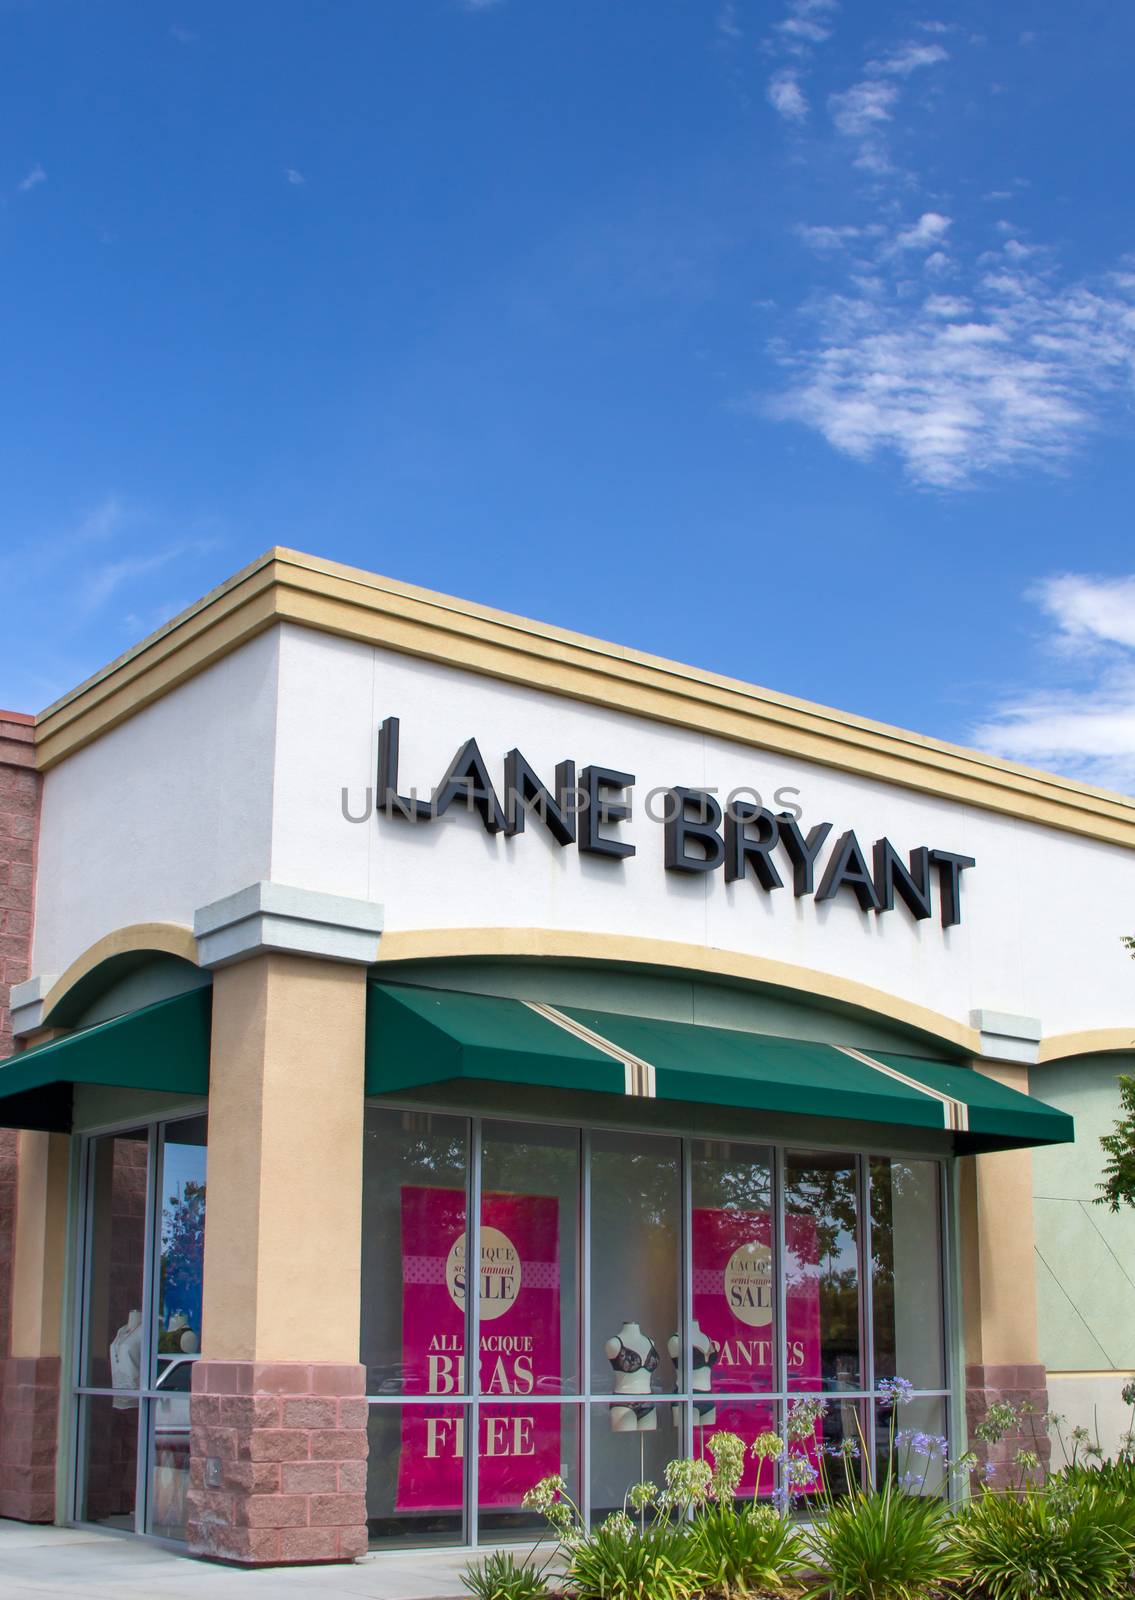 GILROY, CA/USA - JULY 19, 2014: Lane Bryant store exterior. Lane Bryant is a United States retail women's clothing store chain focusing on plus-size clothing.